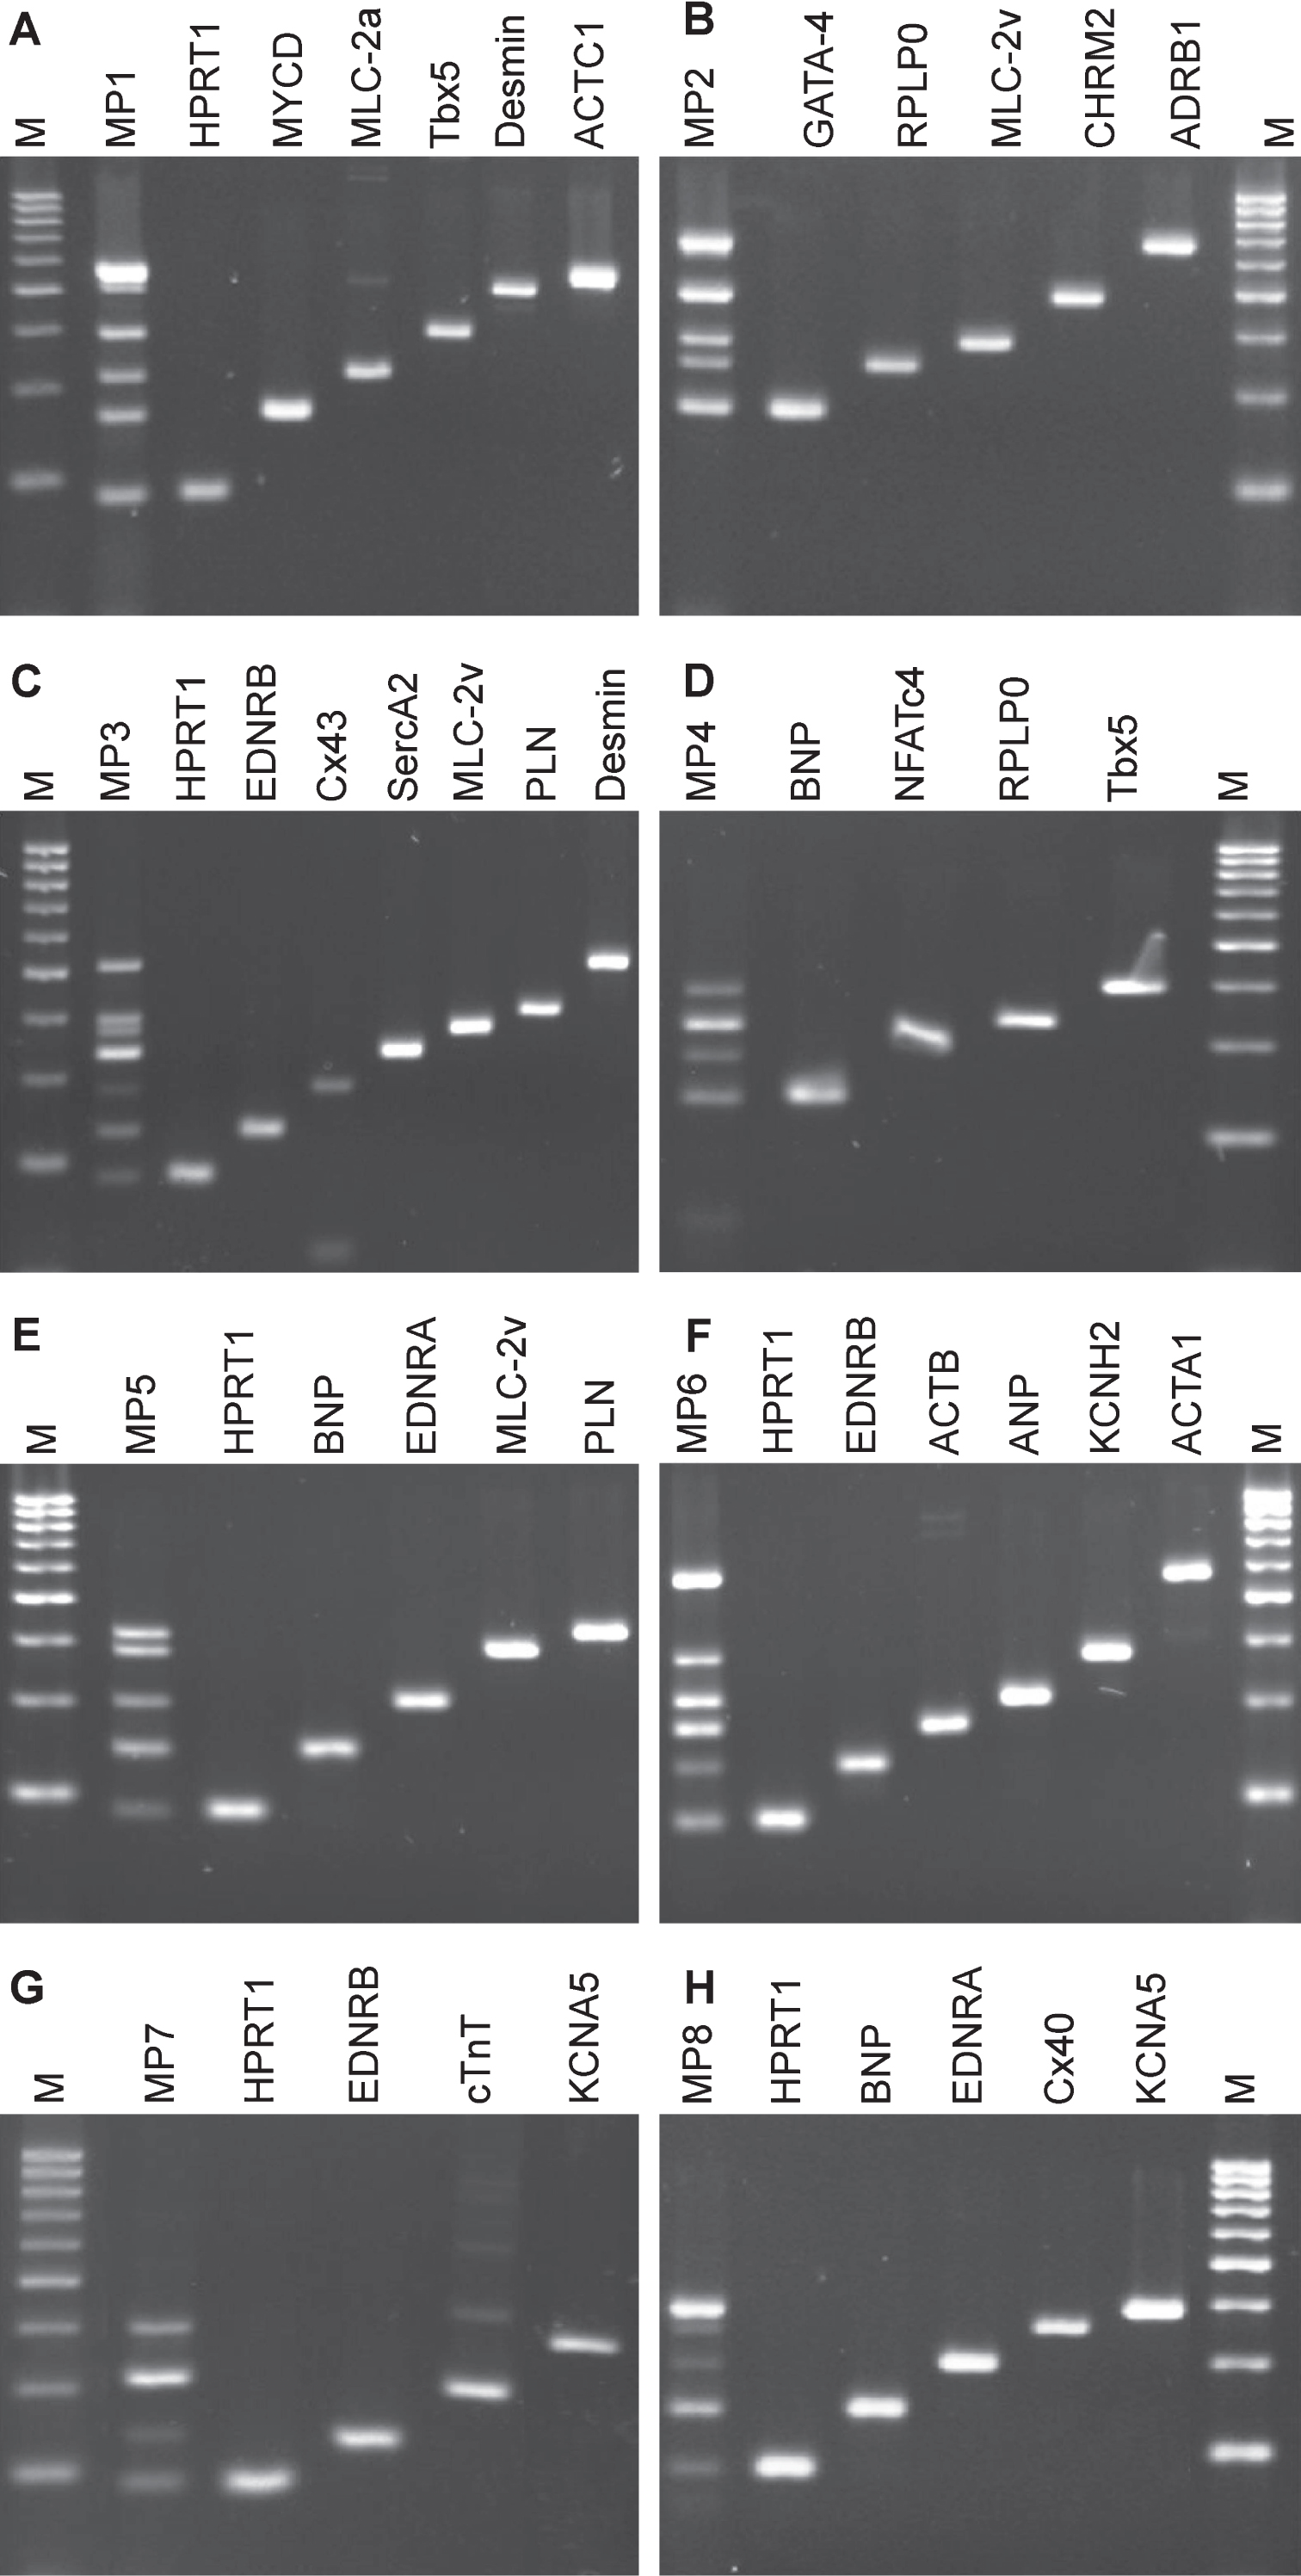 Agarose gel electrophoresis analysis of multiplex PCR on cDNA from ventricular heart muscle tissue. Total RNA of ventricular tissue was prepared, and mRNA was processed into cDNA by reverse transcriptase. Eight combinations of primer pairs that included cardiomyocyte-specific marker or reference gene transcripts (HPRT1 or RPLP0) were set for multiplex PCR. Multiplex PCR amplicons were compared to single loci PCR, respectively. A) Multiplex PCR (MP1) approach amplifying six transcript cDNAs and single transcripts with increasing fragment sizes: HPRT1, MYCD, MLC-2a, Tbx5, DES and ACTC1; B) Multiplex PCR (MP2) approach amplifying five transcript cDNAs and single transcripts with increasing fragment sizes: GATA-4, RPLP0, MLC-2v, CHRM2 and ADRB1; C) Multiplex PCR (MP3) approach amplifying seven transcript cDNAs and single transcripts with increasing fragment sizes: HPRT1, EDNRB, Cx43, SERCA2, MLC-2v, PLN and DES; D) Multiplex PCR (MP4) approach amplifying four transcript cDNAs and single transcripts with increasing fragment sizes: BNP, NFATc4, RPLP0 and Tbx5; E) Multiplex PCR (MP5) approach amplifying five transcript cDNAs and single transcripts with increasing fragment sizes: HPRT1, BNP, EDNRA, MLC-2v and PLN; F) Multiplex PCR (MP6) approach amplifying six transcript cDNAs and single transcripts with increasing fragment sizes: HPRT1, EDNRB, ACTB, ANP, KCNH2 and ACTA1; G) Multiplex PCR (MP7) approach amplifying four transcript cDNAs and single transcripts with increasing fragment sizes: HPRT1, EDNRB, cTnT and KCNA5; H), Multiplex PCR (MP8) approach amplifying five transcript cDNAs and single transcripts with increasing fragment sizes: HPRT1, BNP, EDNRA, Cx40 and KCNA5. Amplicons were compared to 50 bp marker.